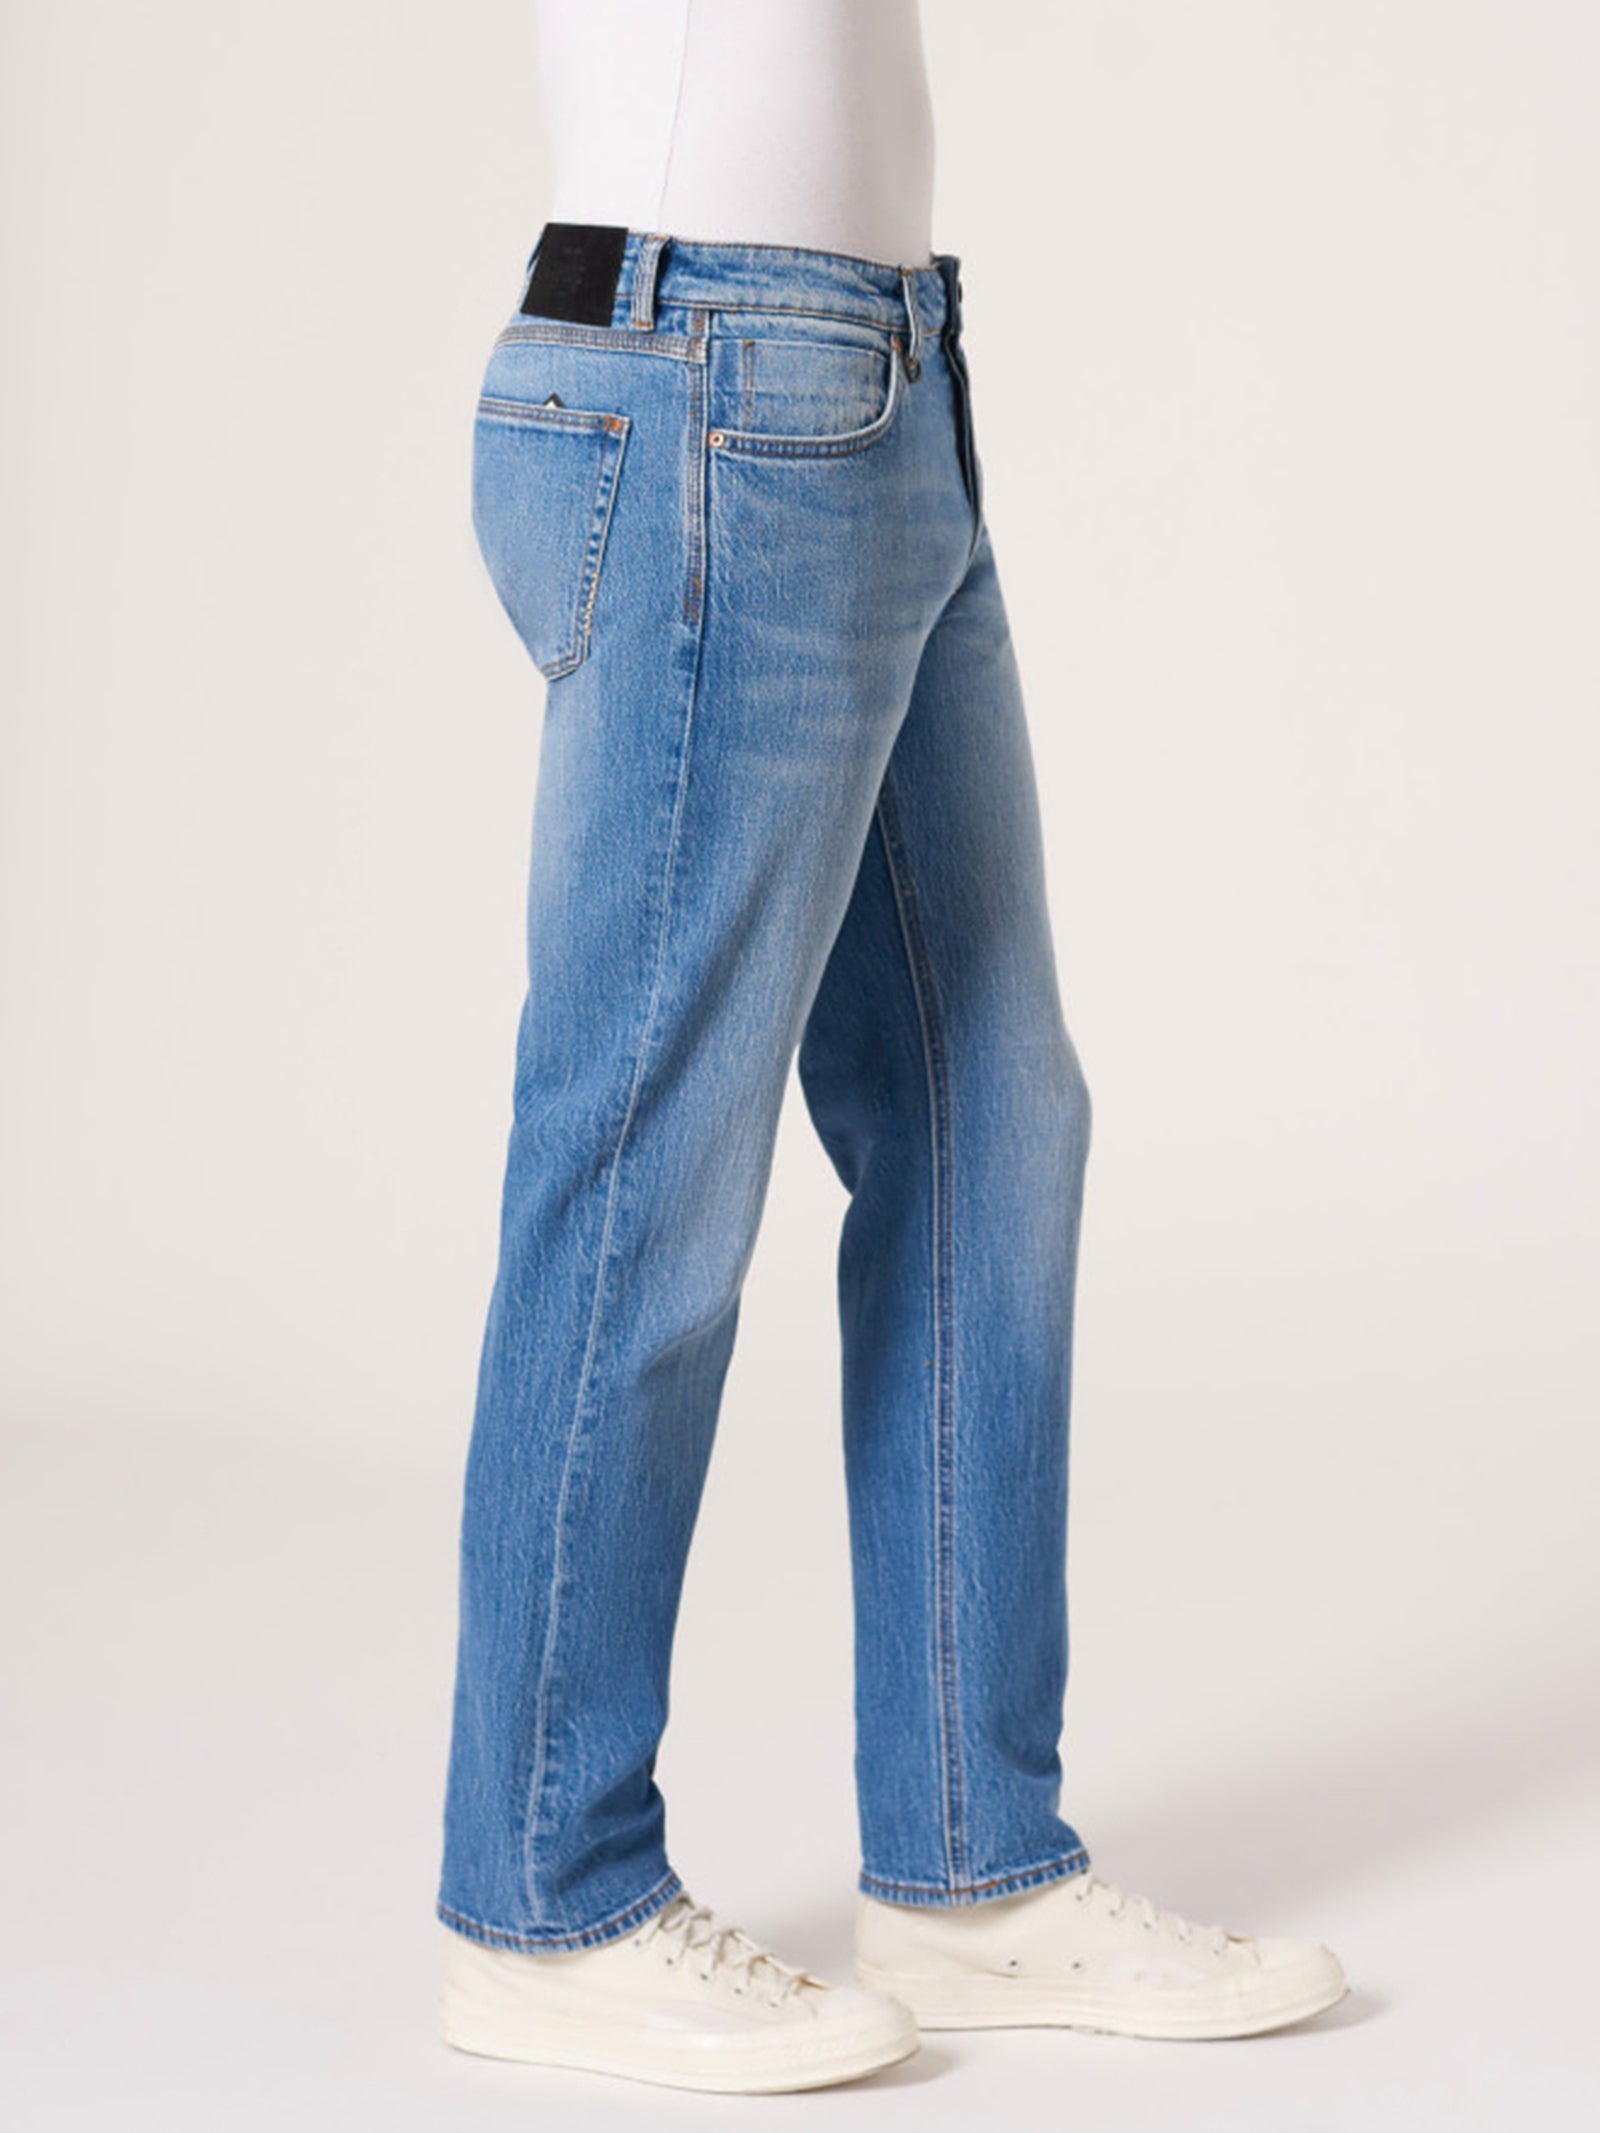 Levi's - 551 Z Authentic Straight Crop Jeans in Dream Stone – gravitypope